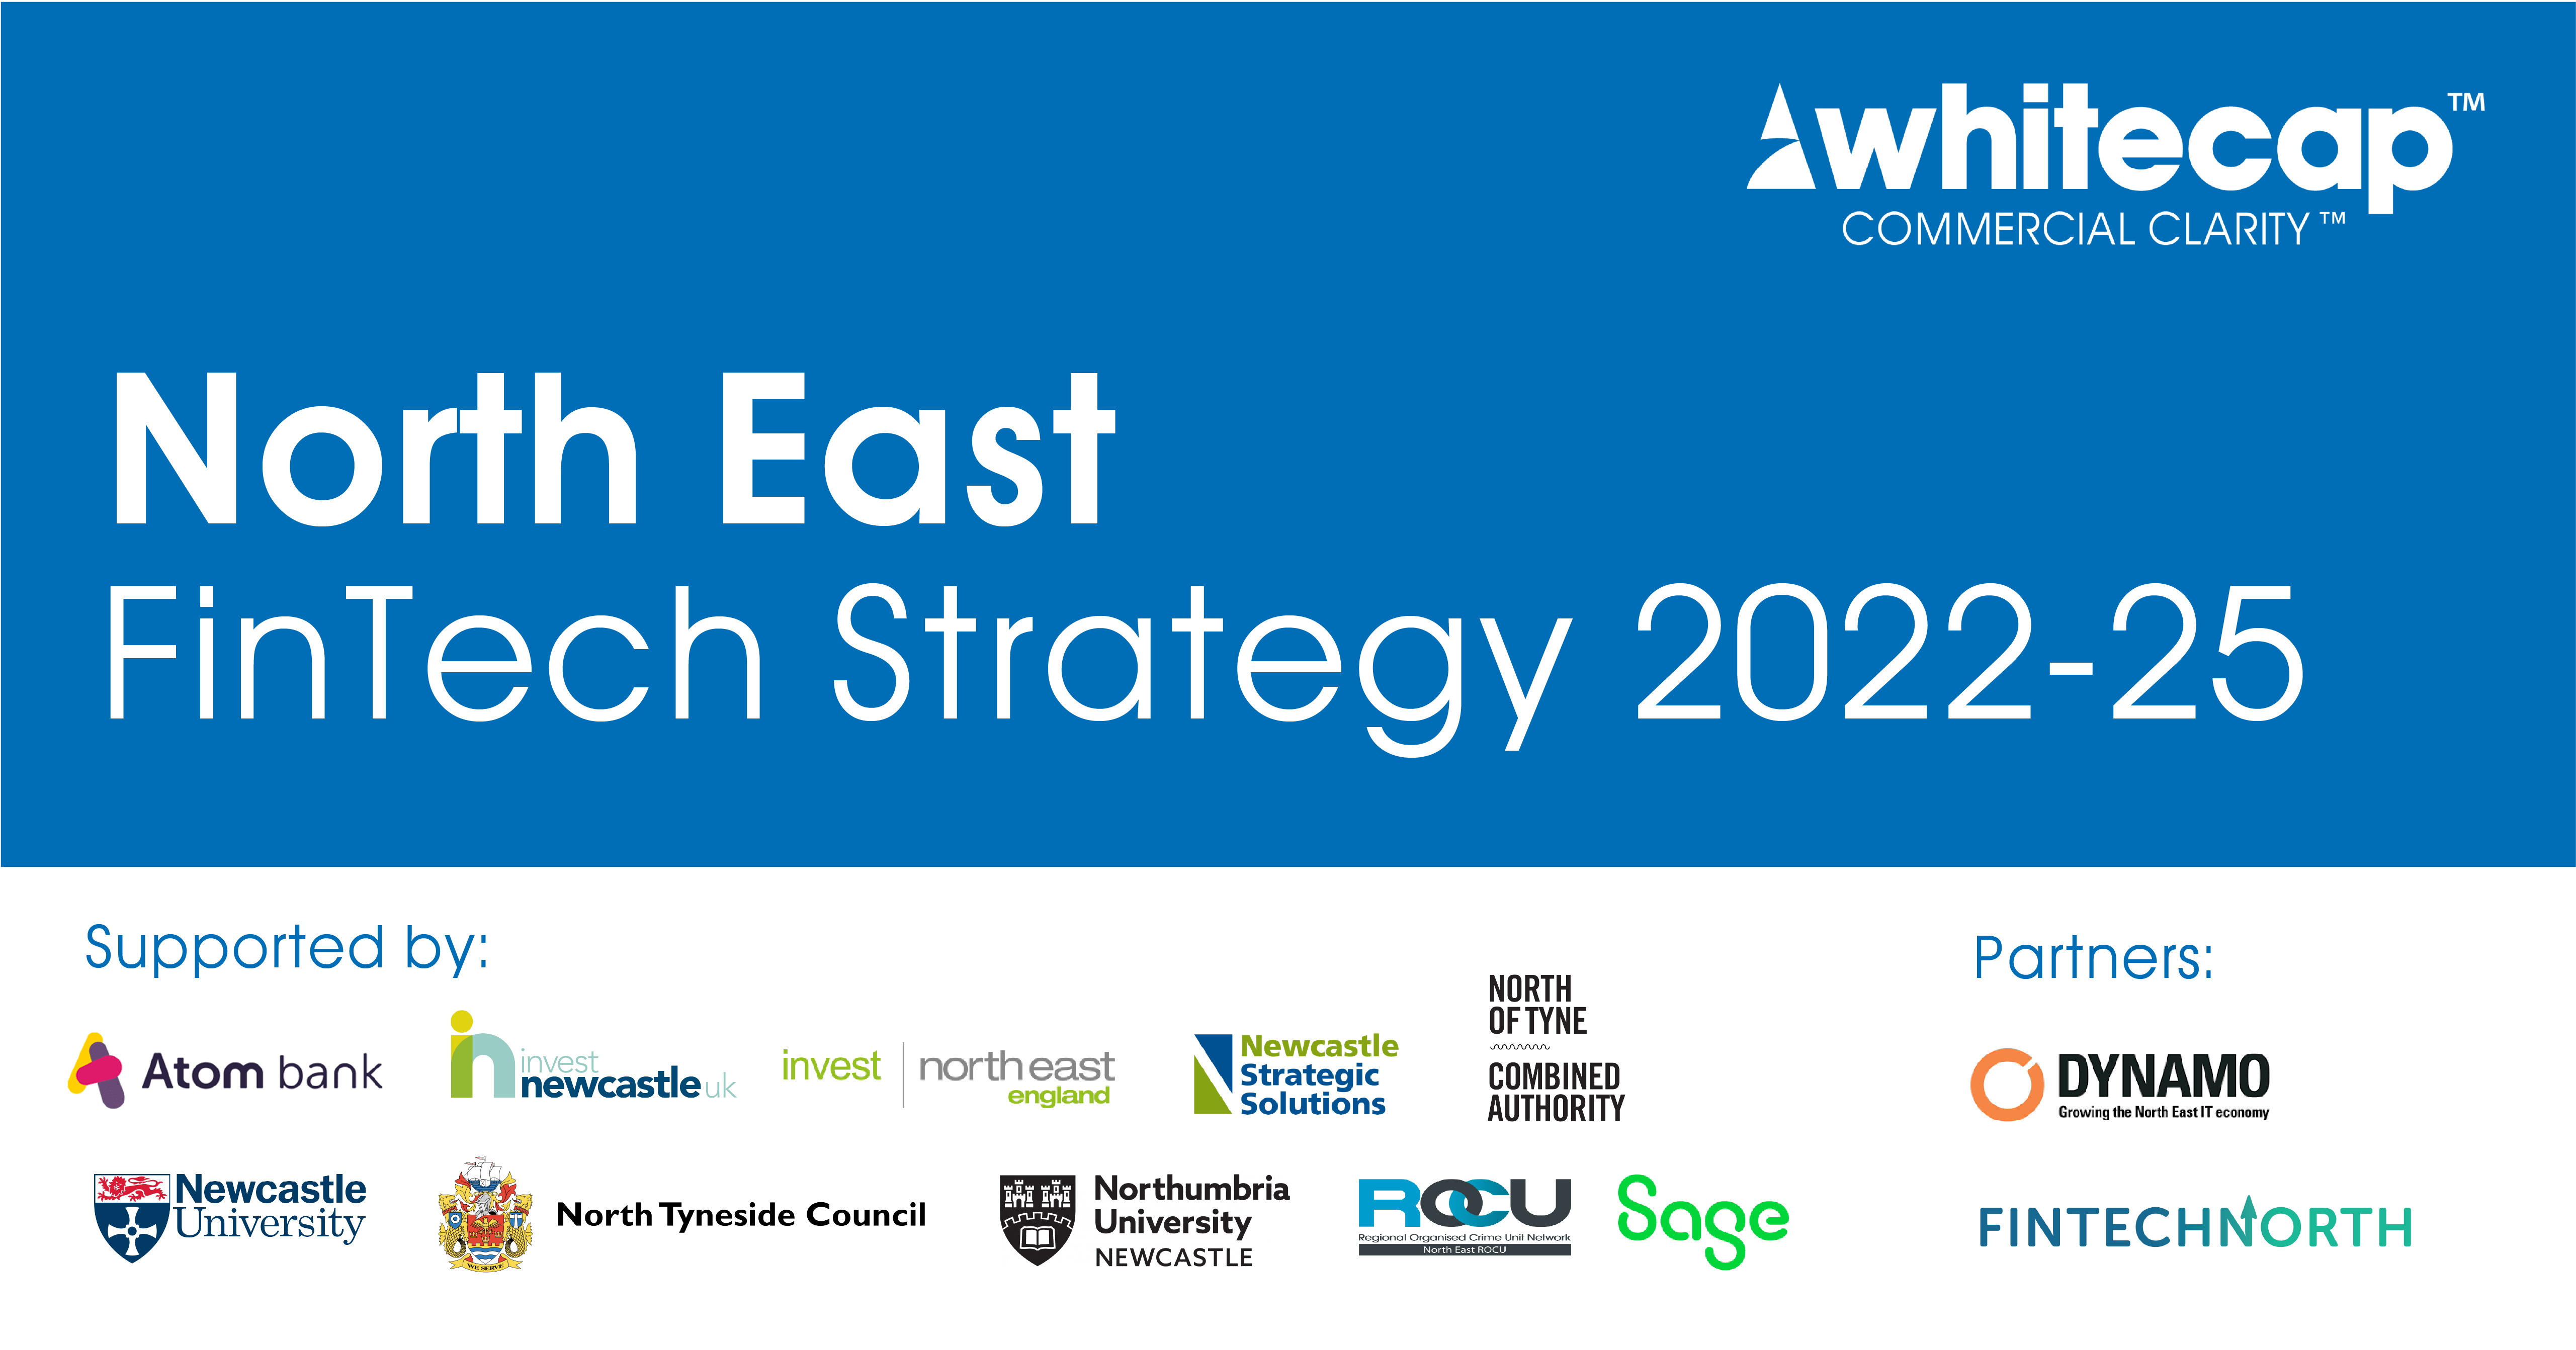 North East FinTech Strategy 2022-25: Launch Event with Whitecap Consulting, hosted by Womble Bond Dickinson